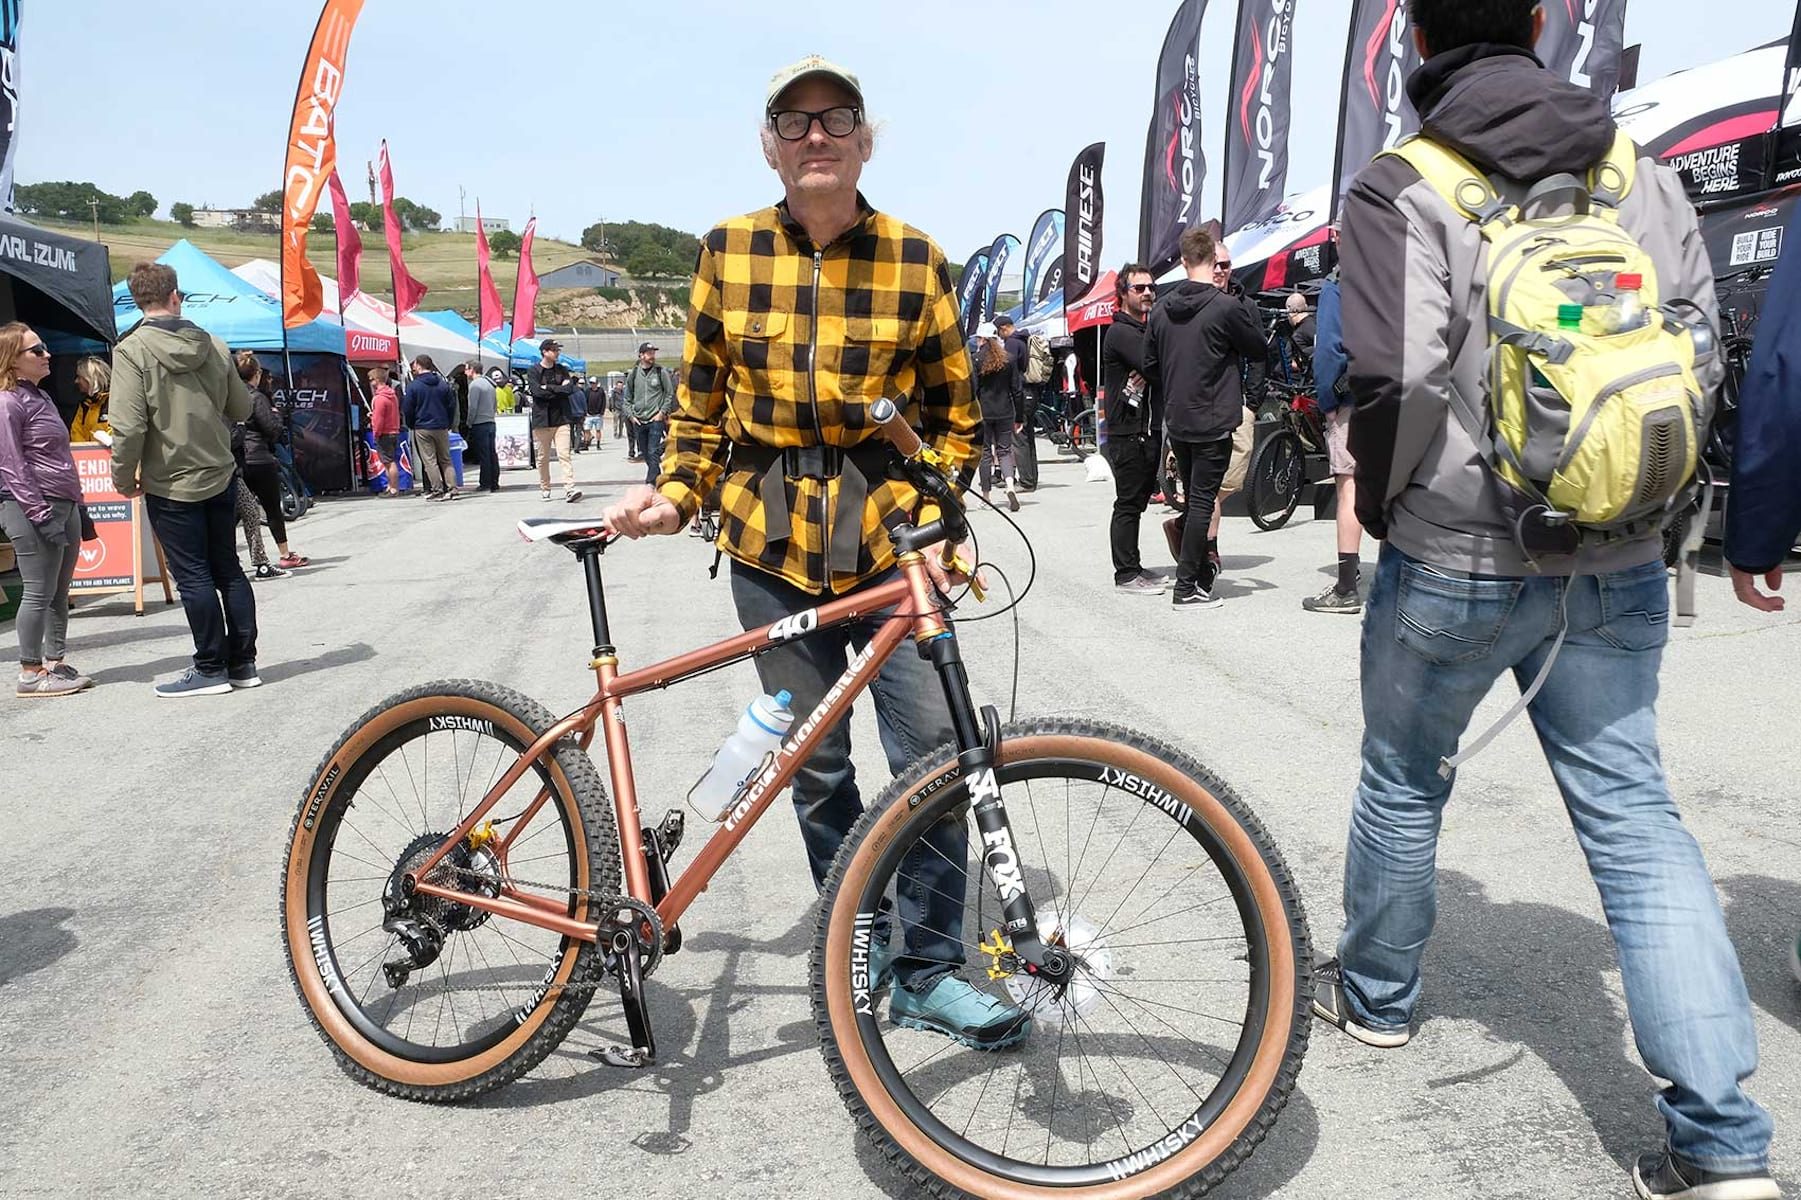 sea otter classic 2019, new products, paul sadoff, rock lobster